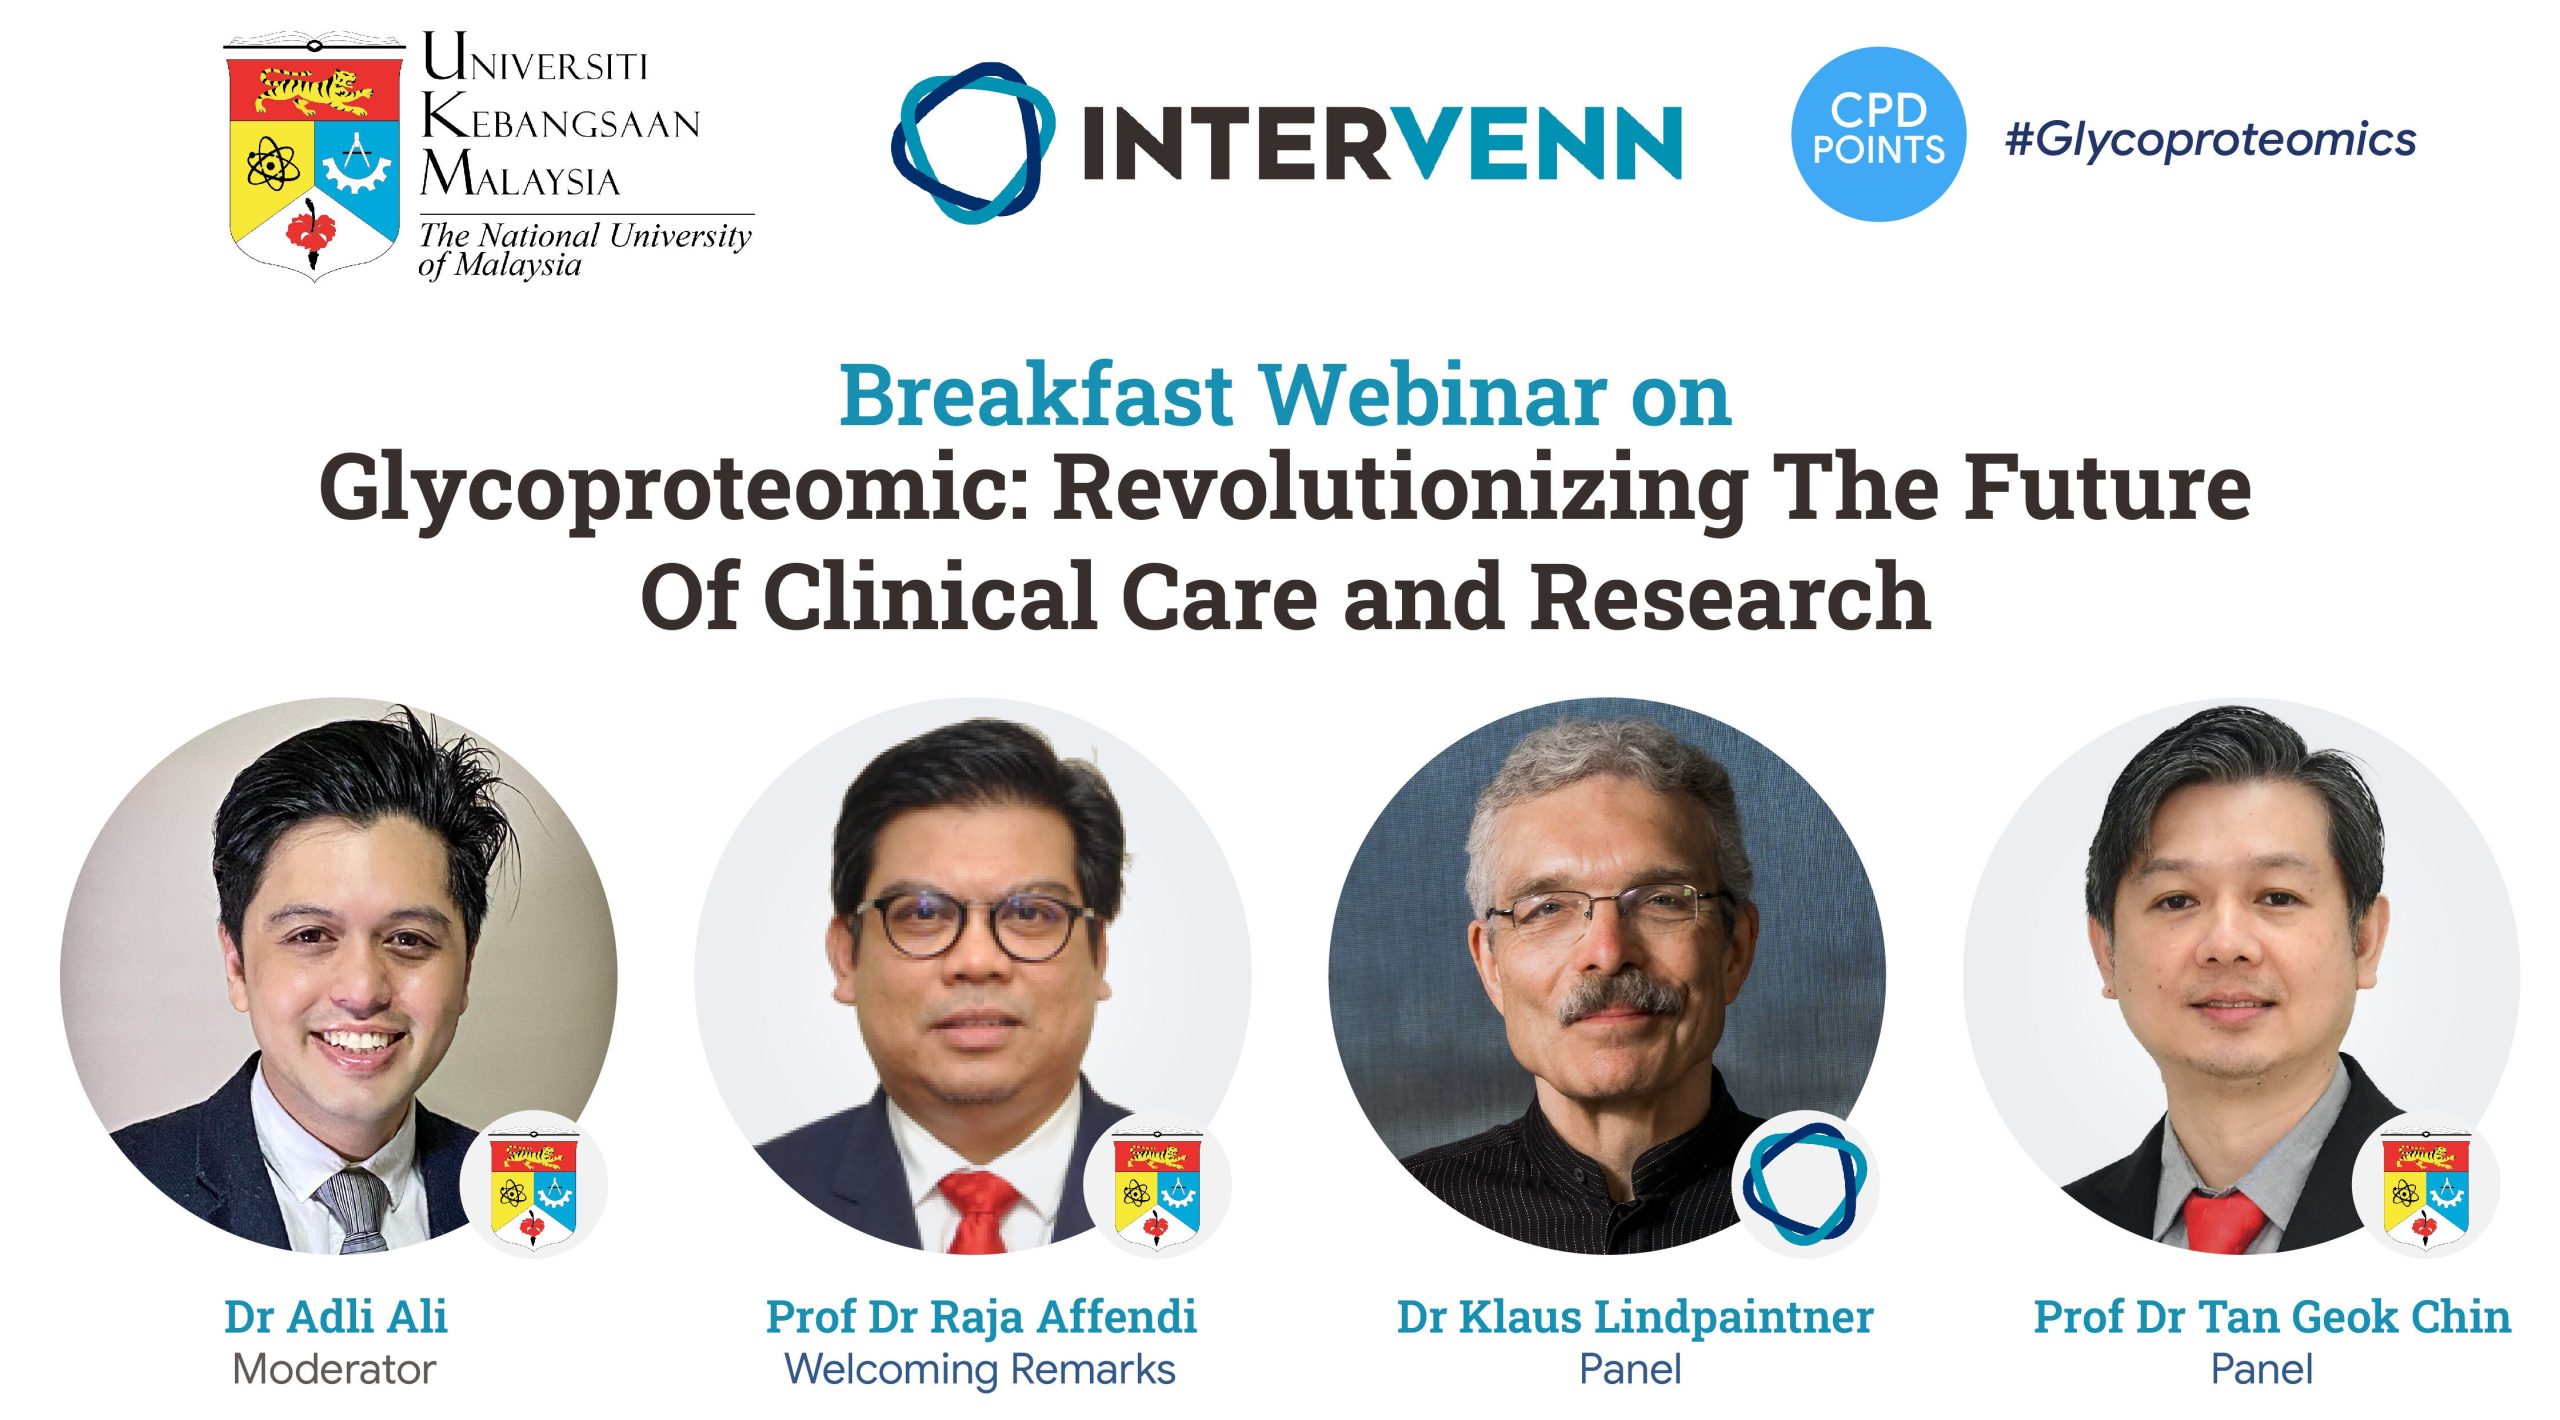 Breakfast Webinar on Glycoproteomic: Revolutionizing The Future of Clinical Care and Research